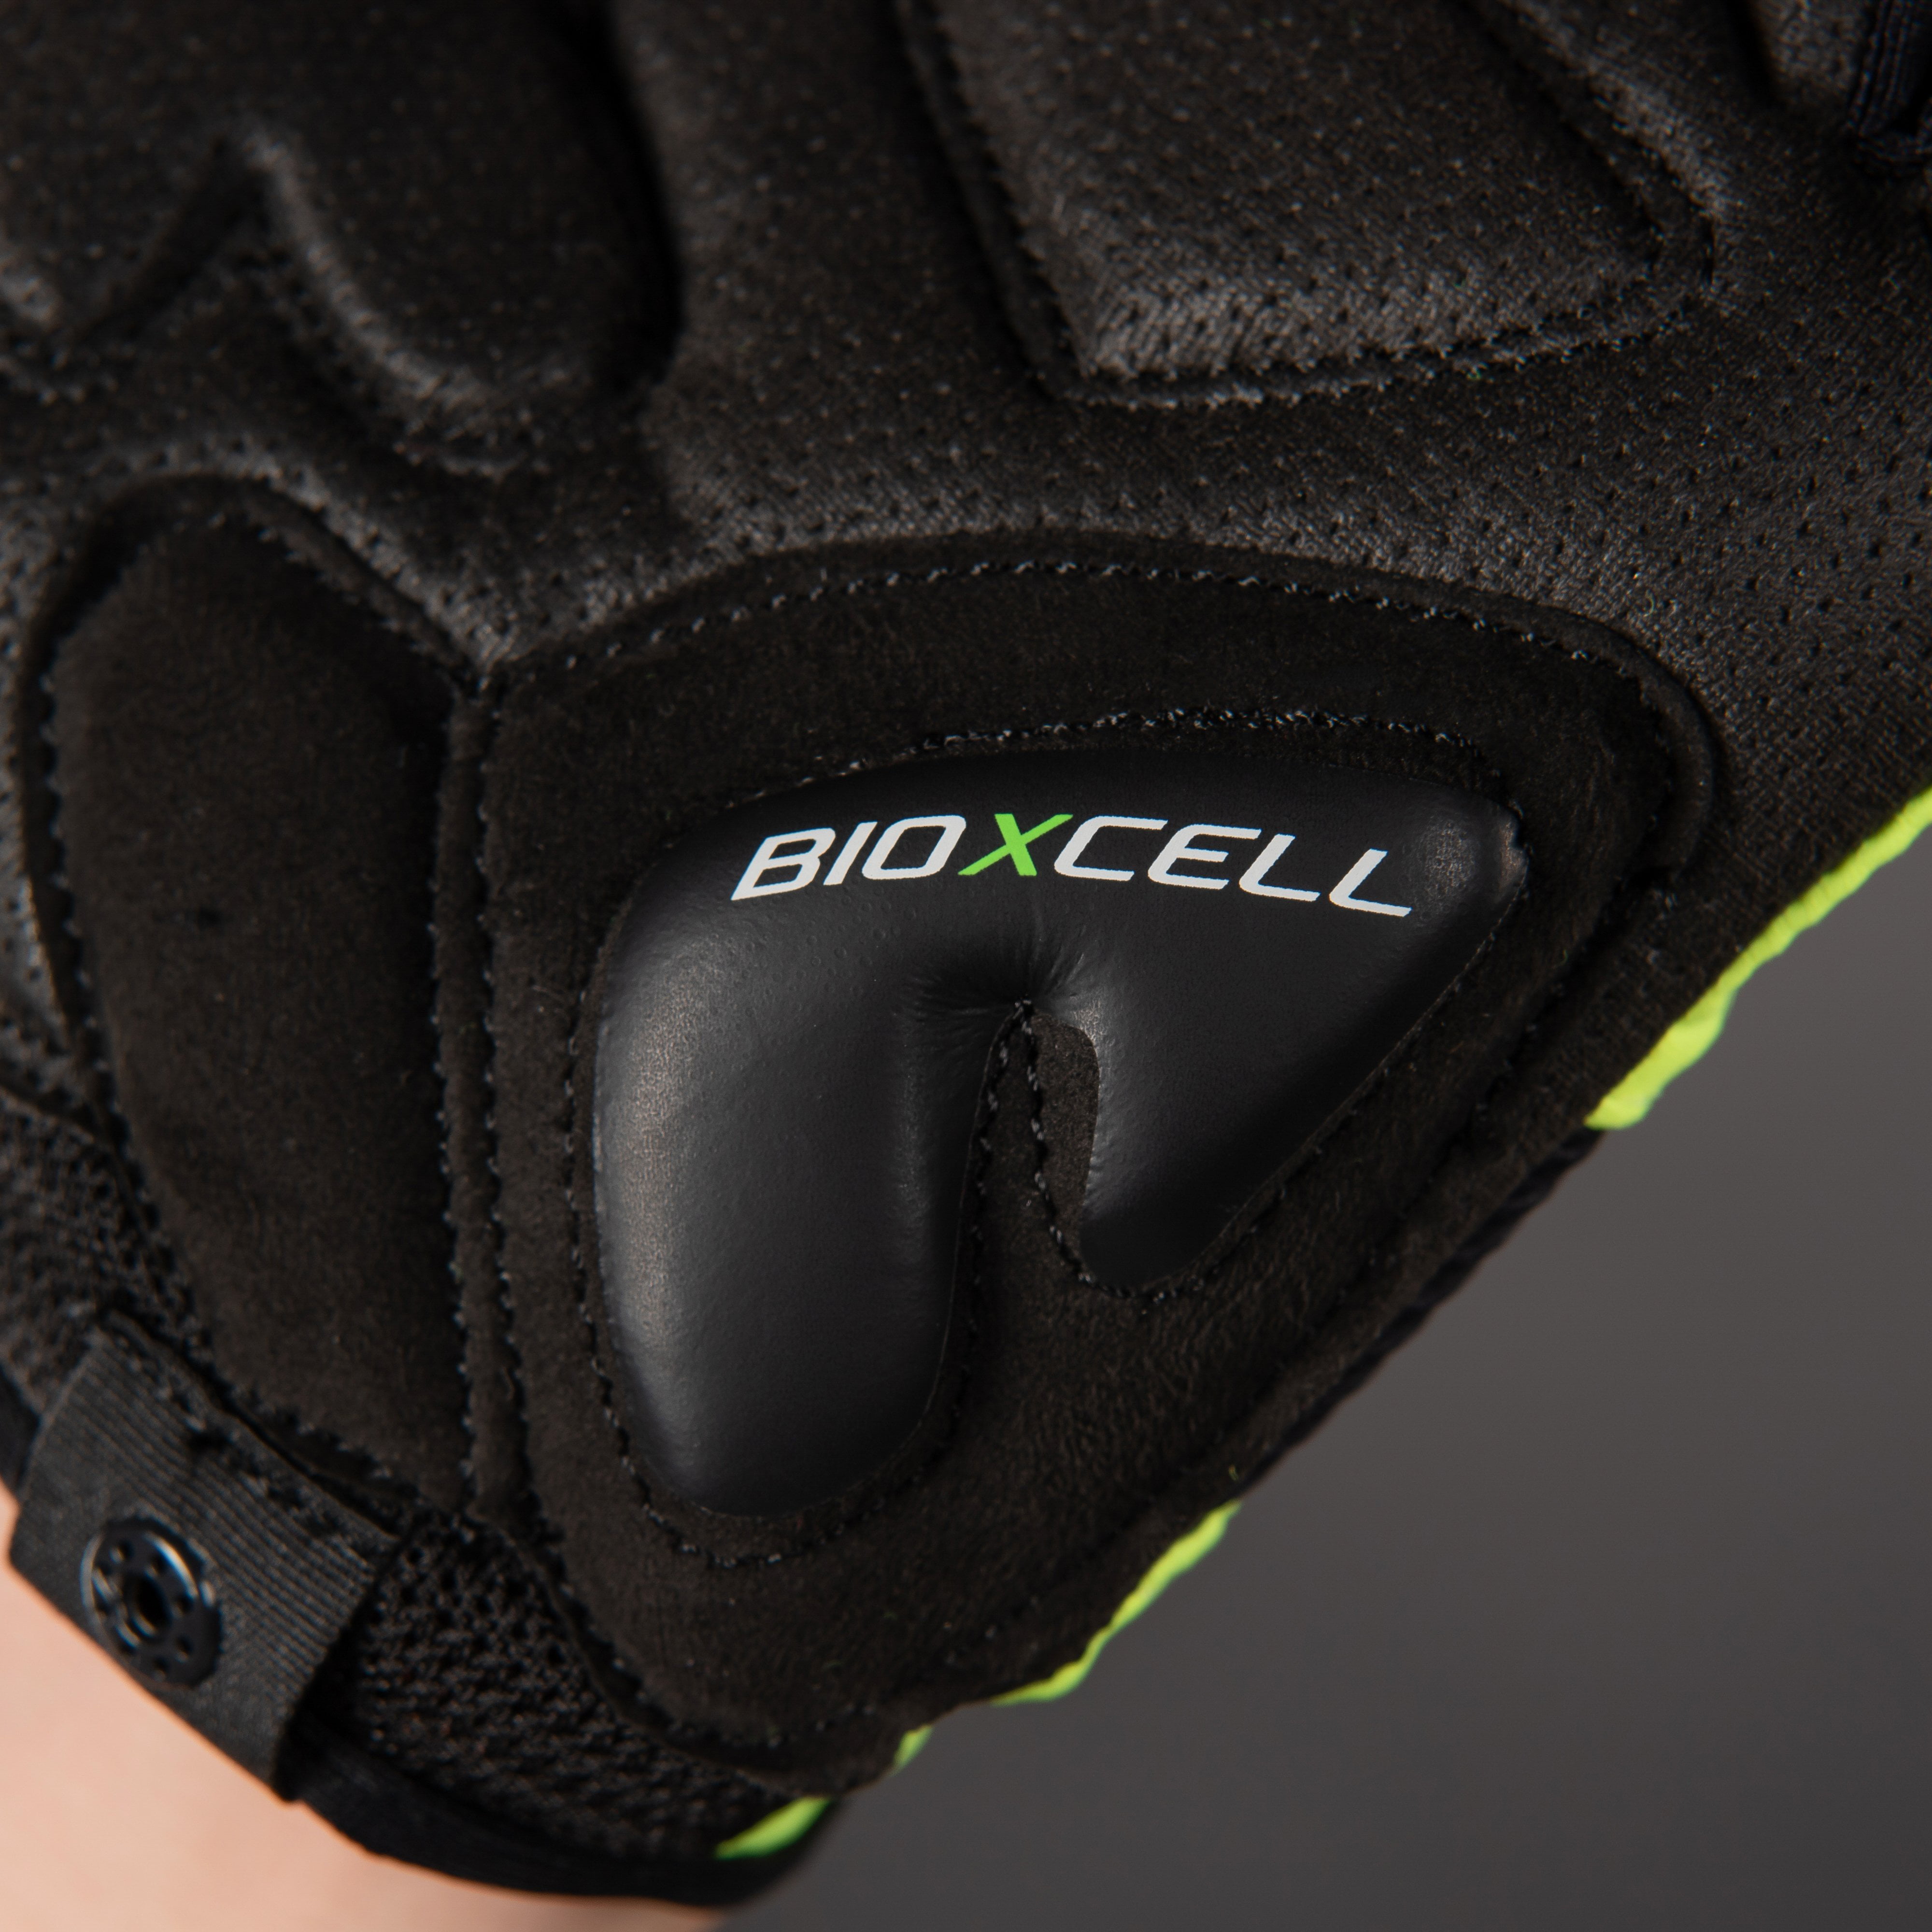 Details about   Chiba Gloves BioXCell Classic Bike Gloves Neon Yellow Large 